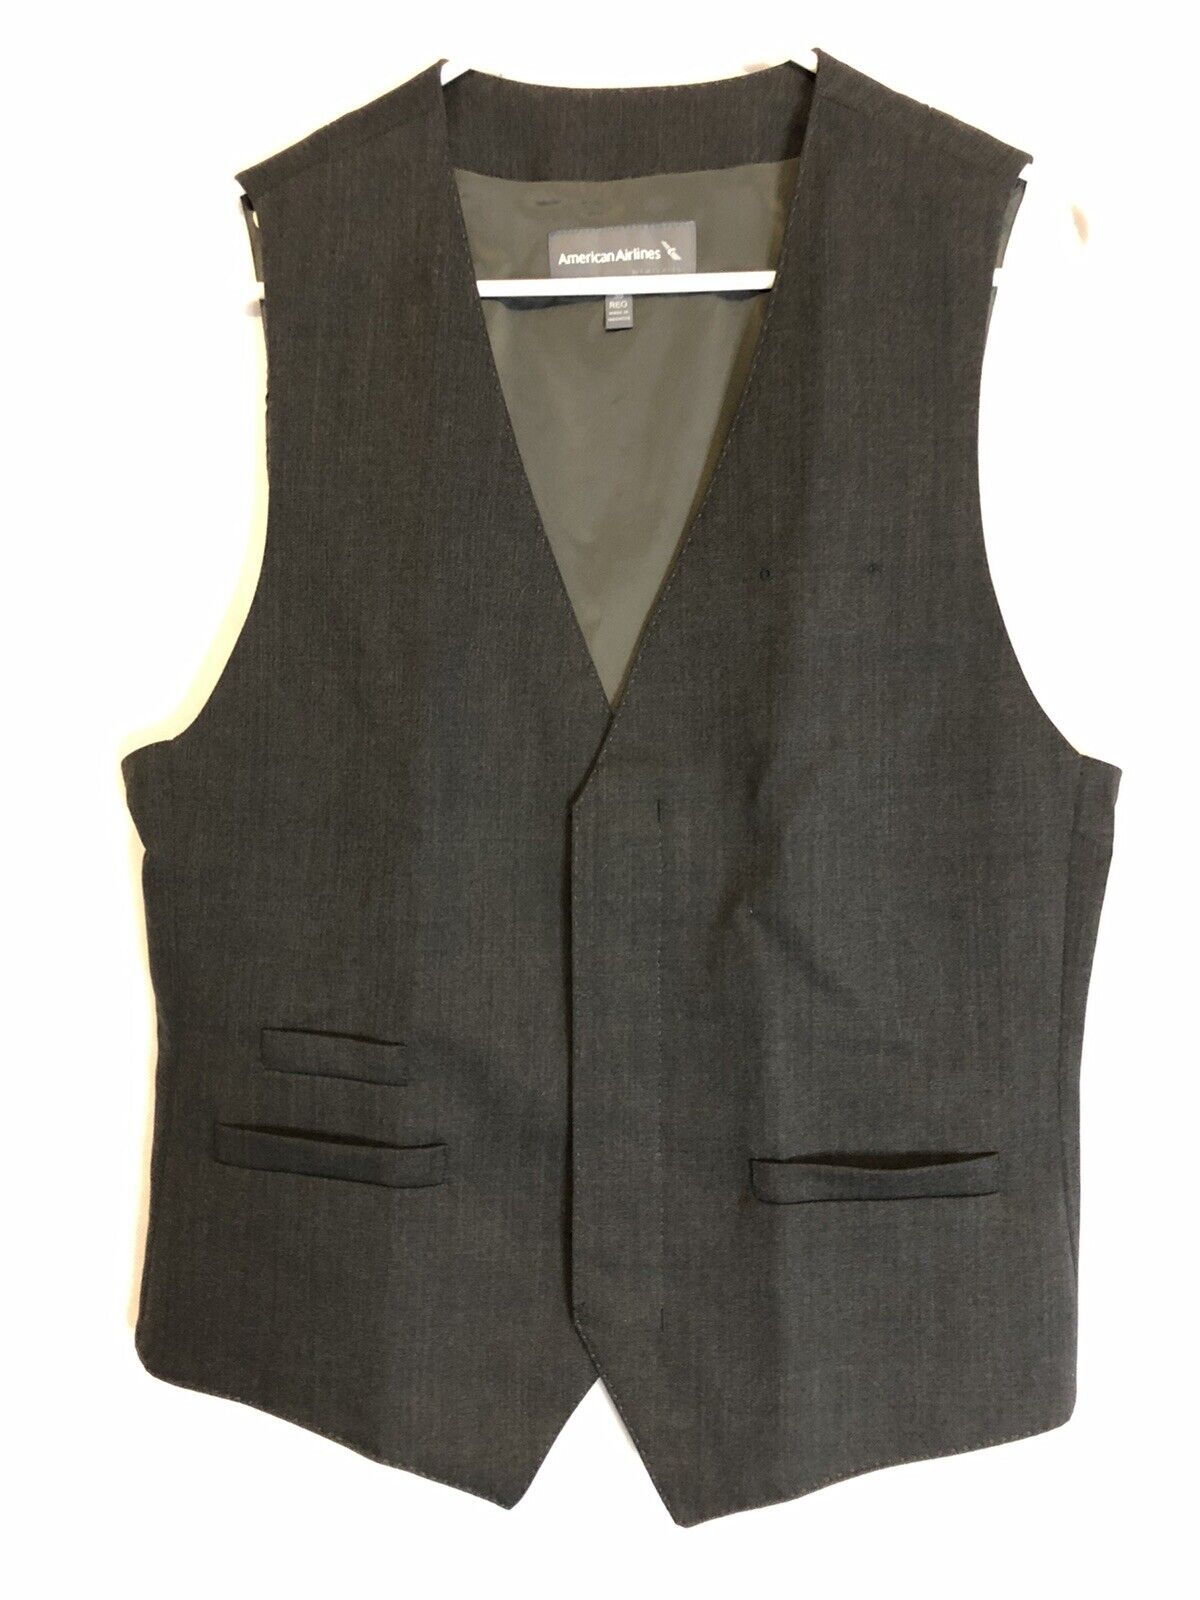 American Airlines Crew Vest by Twinhill Size 38 Reg Dark Gray NWOT